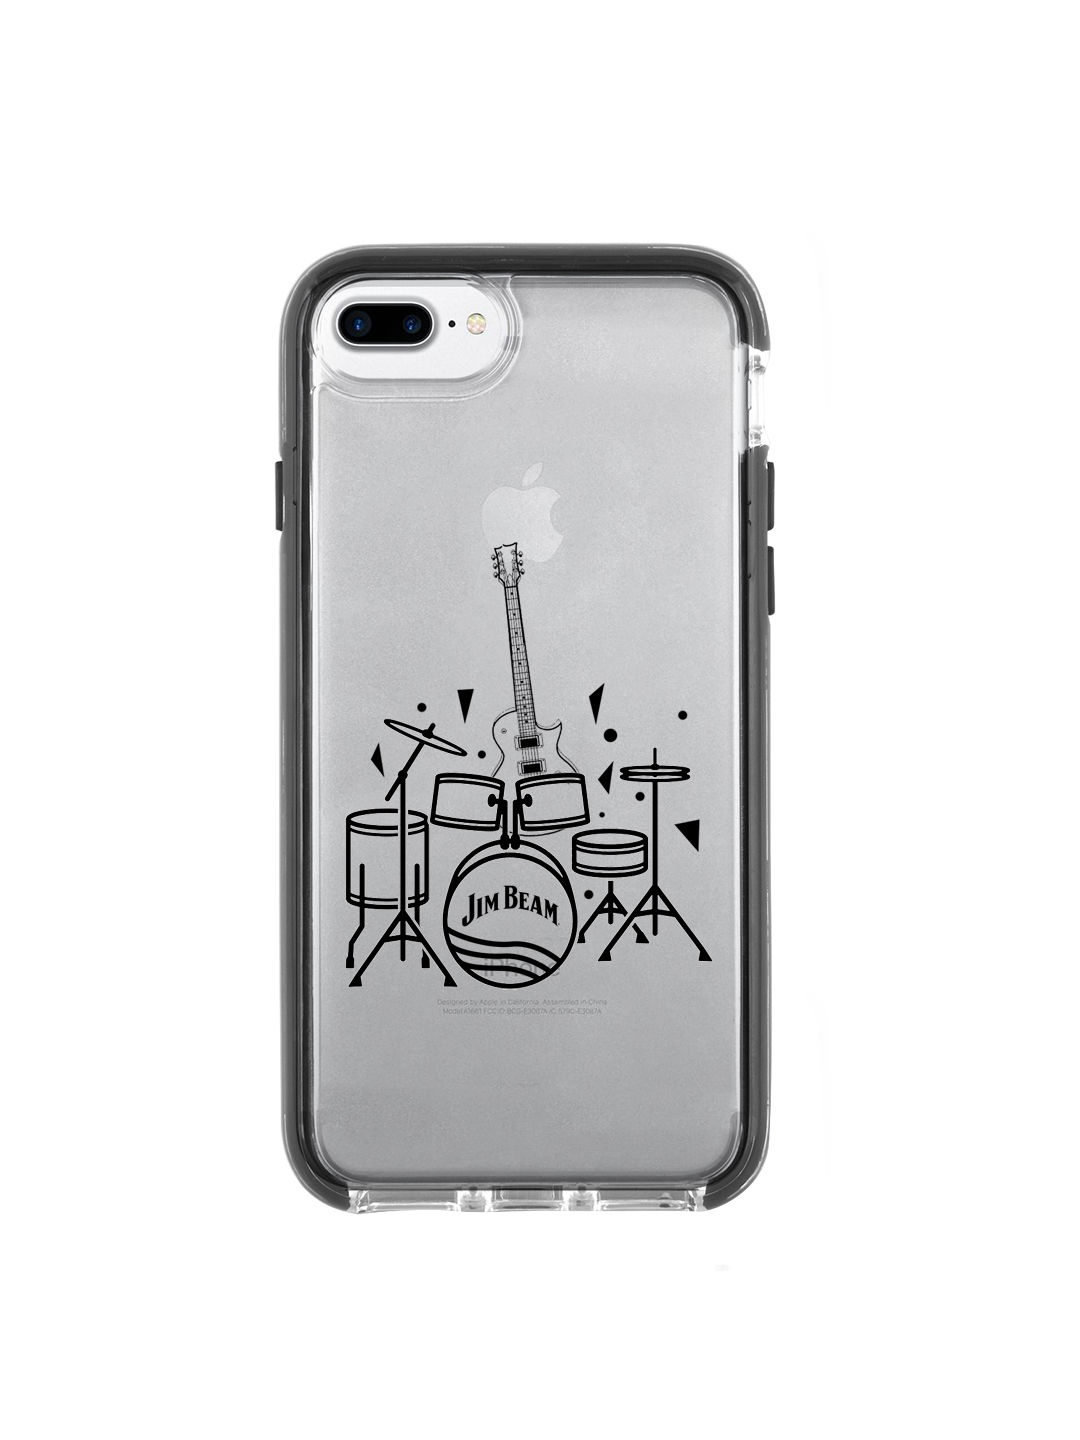 Jim Beam The Band - Shield Case for iPhone 6 Plus